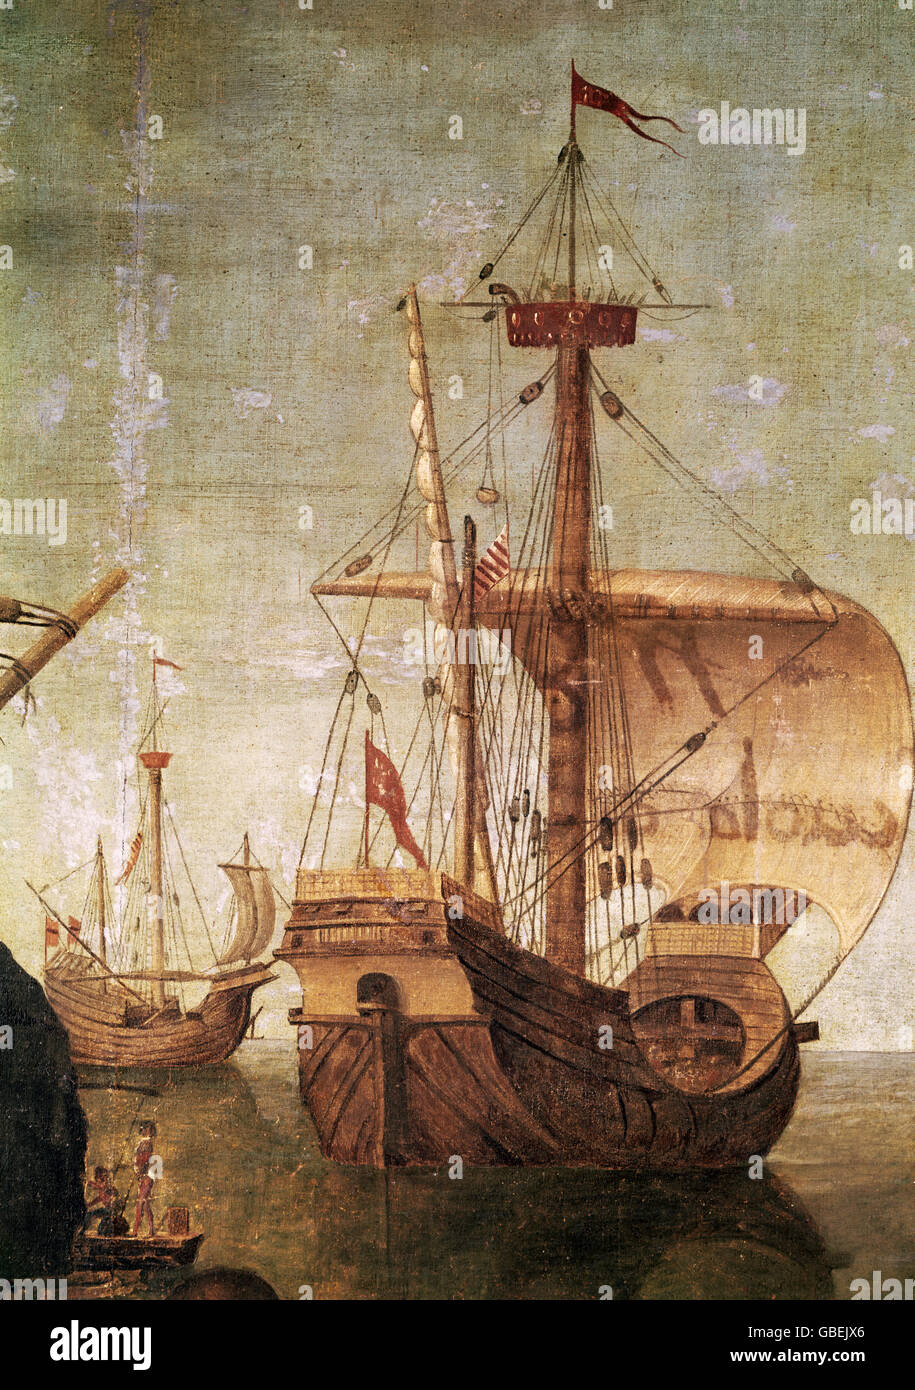 transport / transportation, navigation, sailing ships, carrack, detail from the painting 'Legend of Saint Ursula', by Vittore Carpaccio (ca. 1455 - 1526), circa 1495, Accademia Venezia, Additional-Rights-Clearences-Not Available Stock Photo